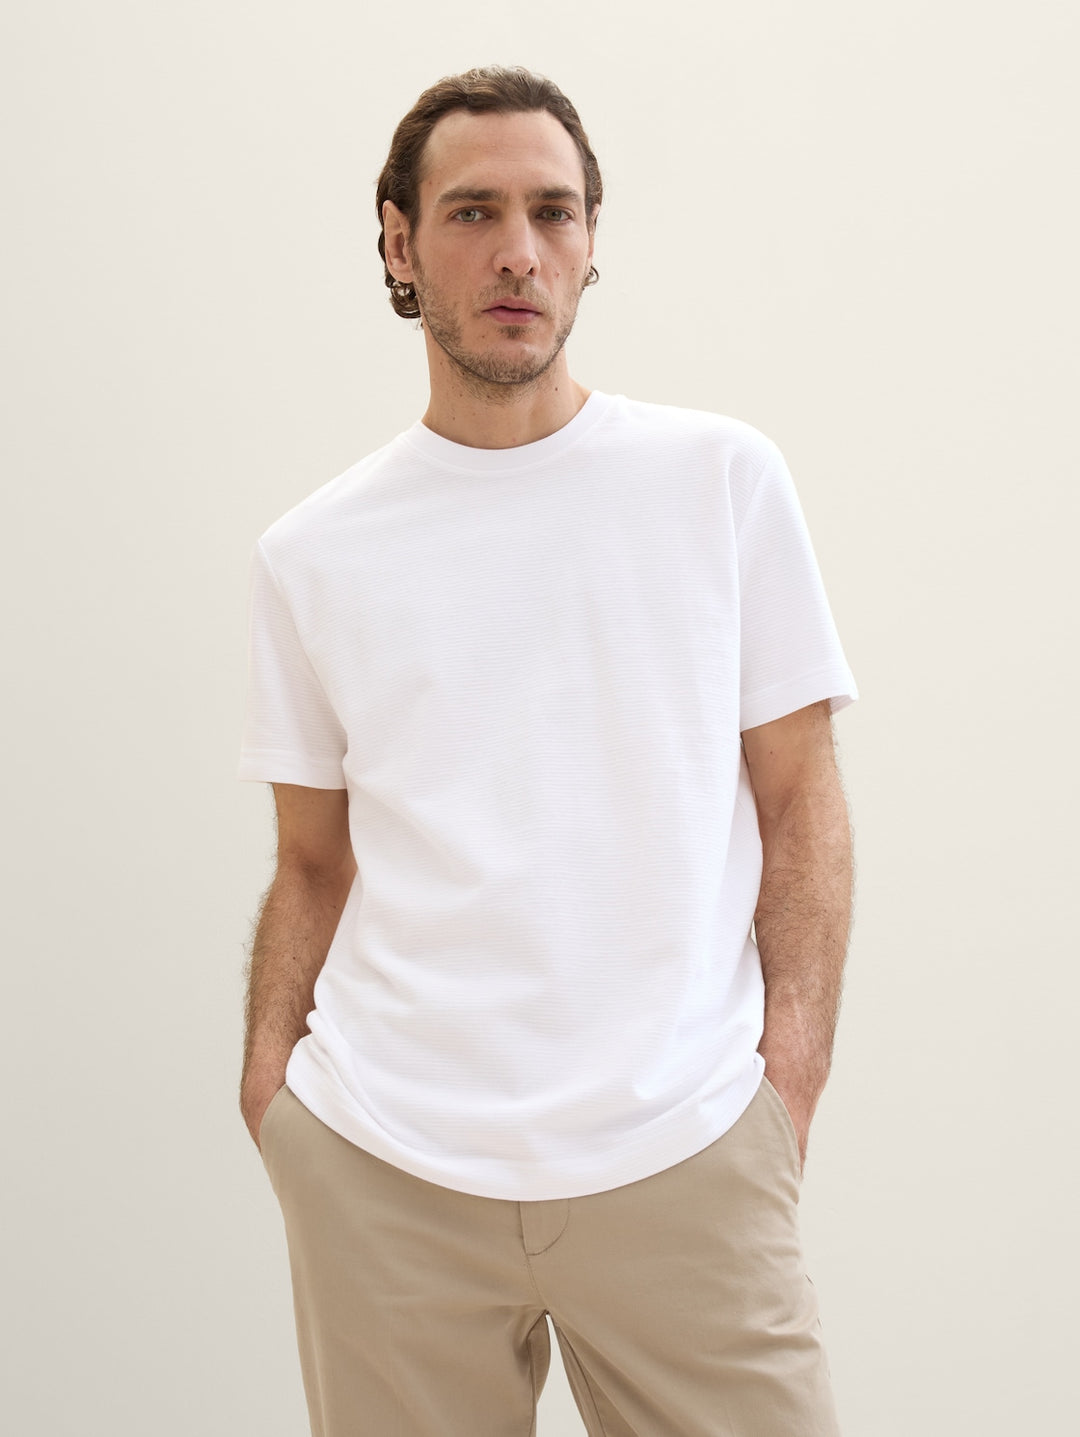 STRUCTURED T-SHIRT